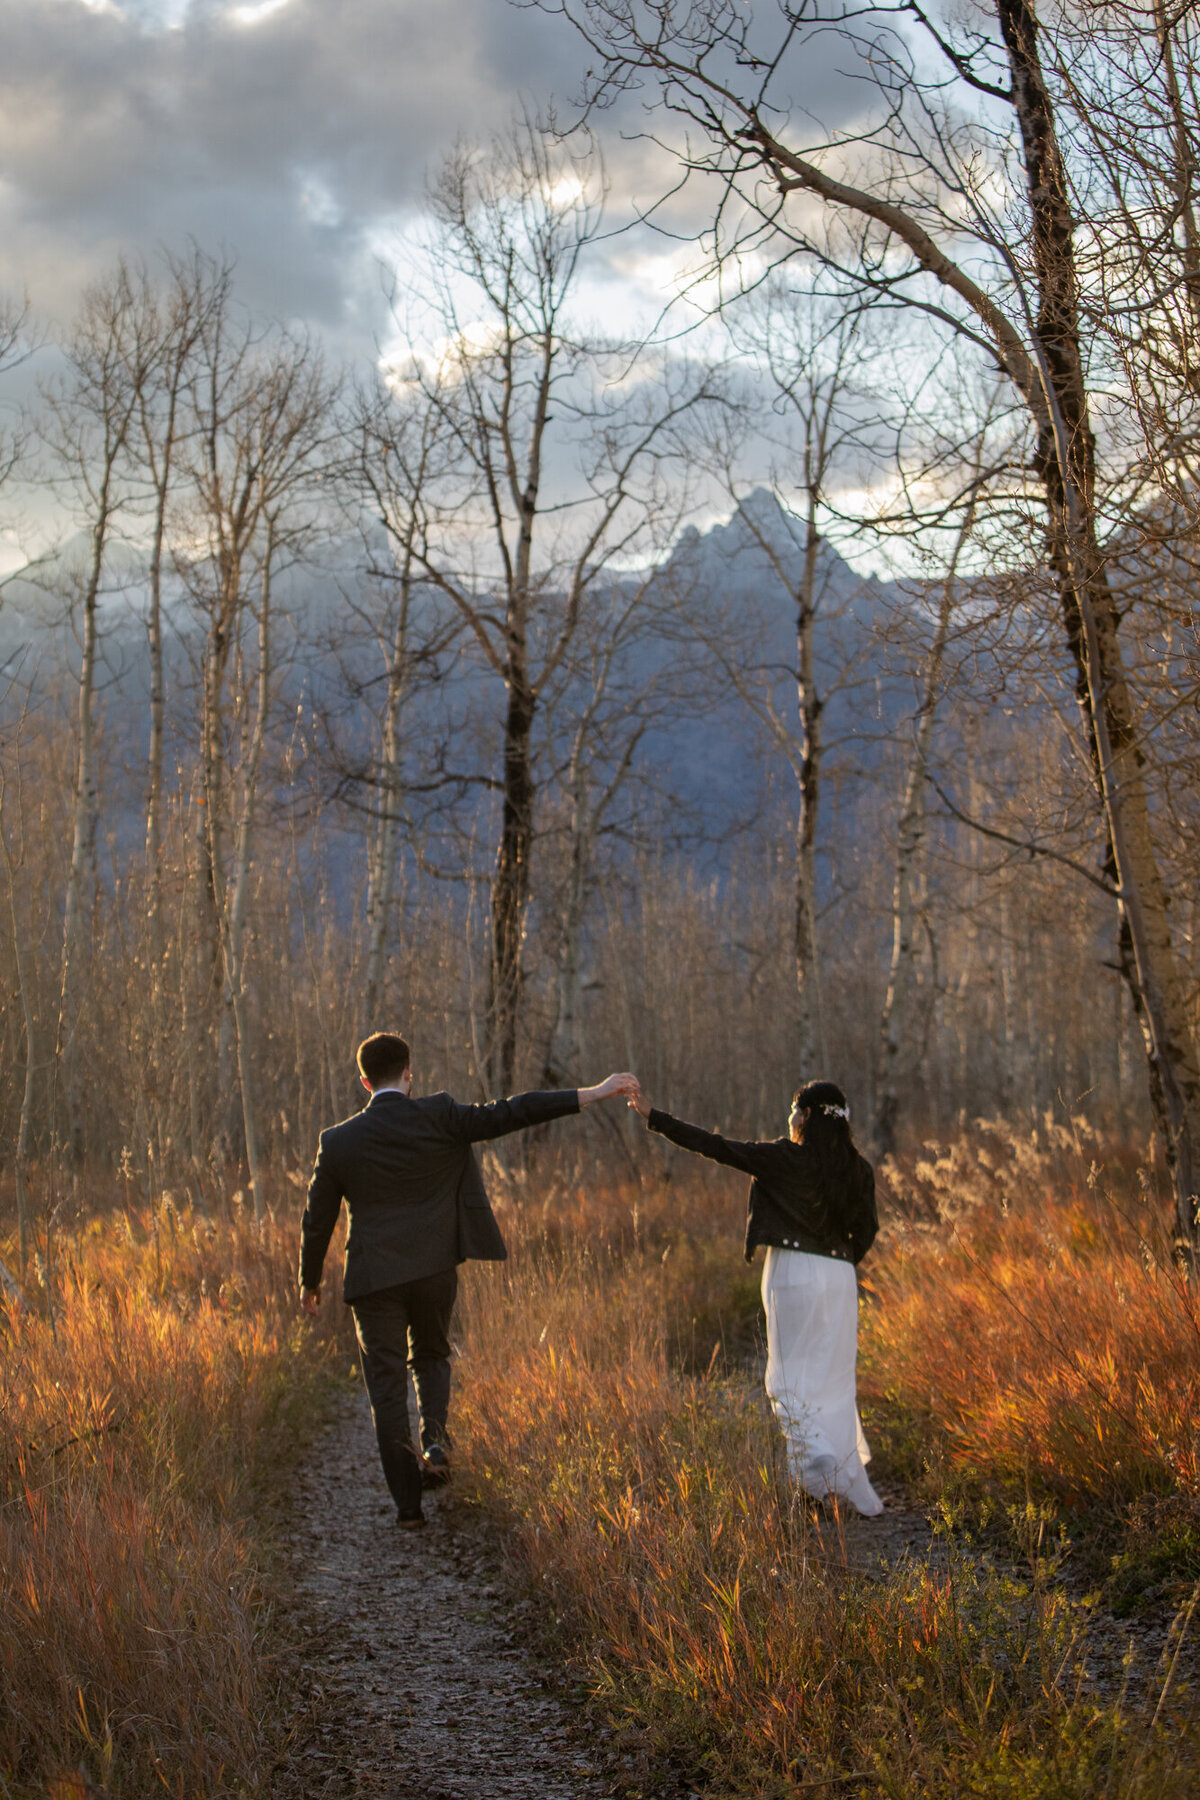 A bride and groom walk with their hands raised as they walk through a grassy dirt road.